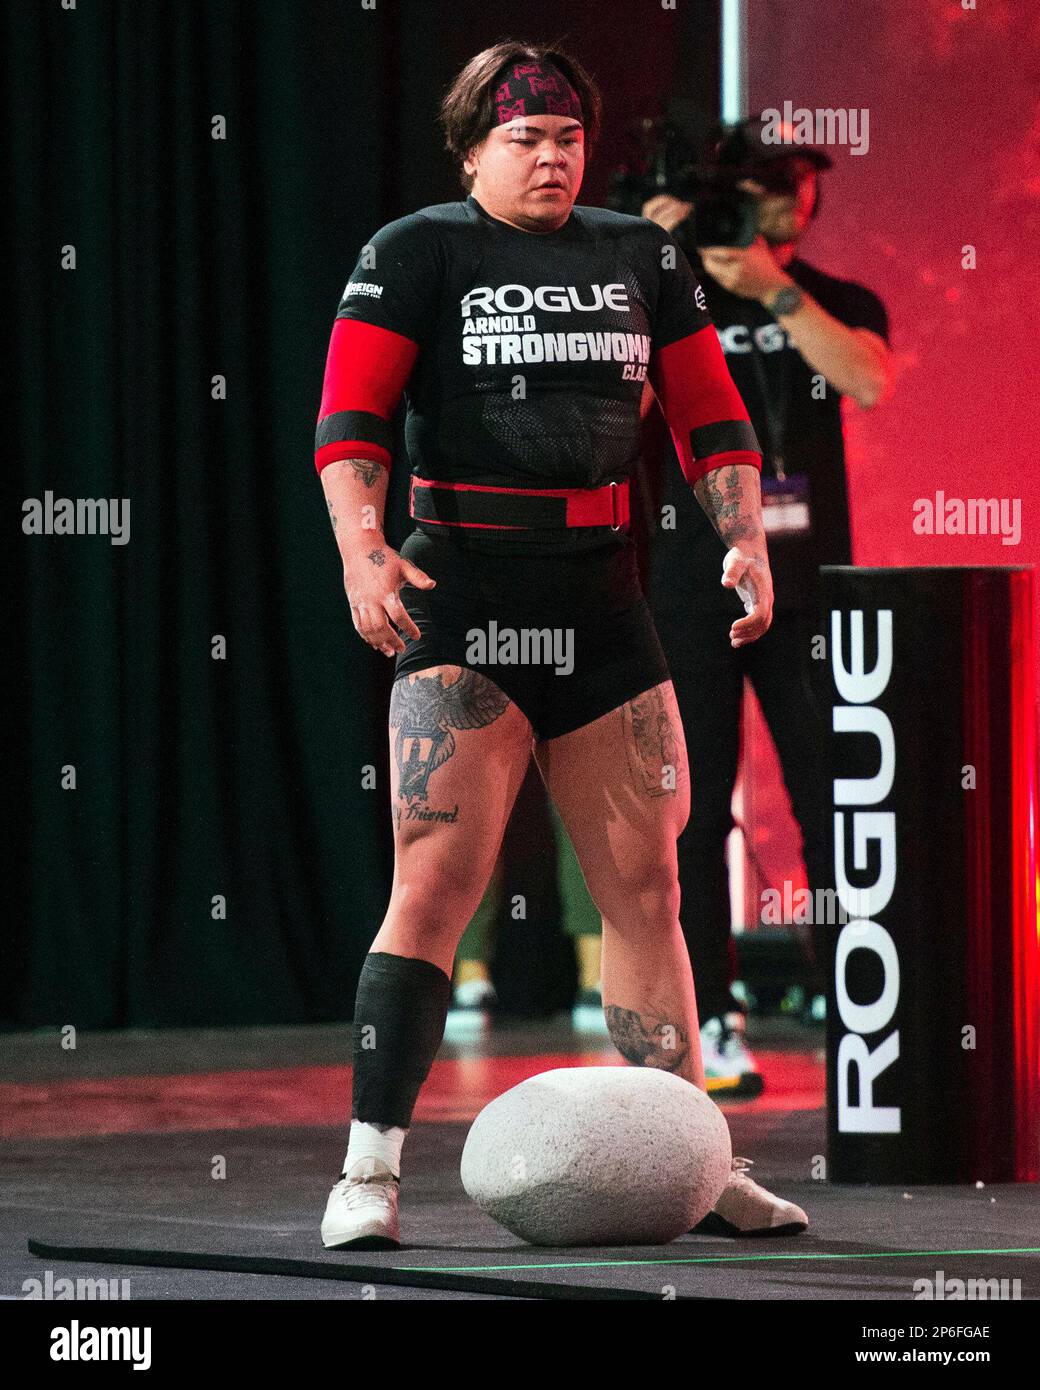 Columbus, Ohio, United States. 4th Mar, 2023. Inez Carrasquillo (USA) competes in the Unspunnen Stone Throw at the Arnold Strongwoman Classic in Columbus, Ohio. Credit: Brent Clark/Alamy Live News Stock Photo